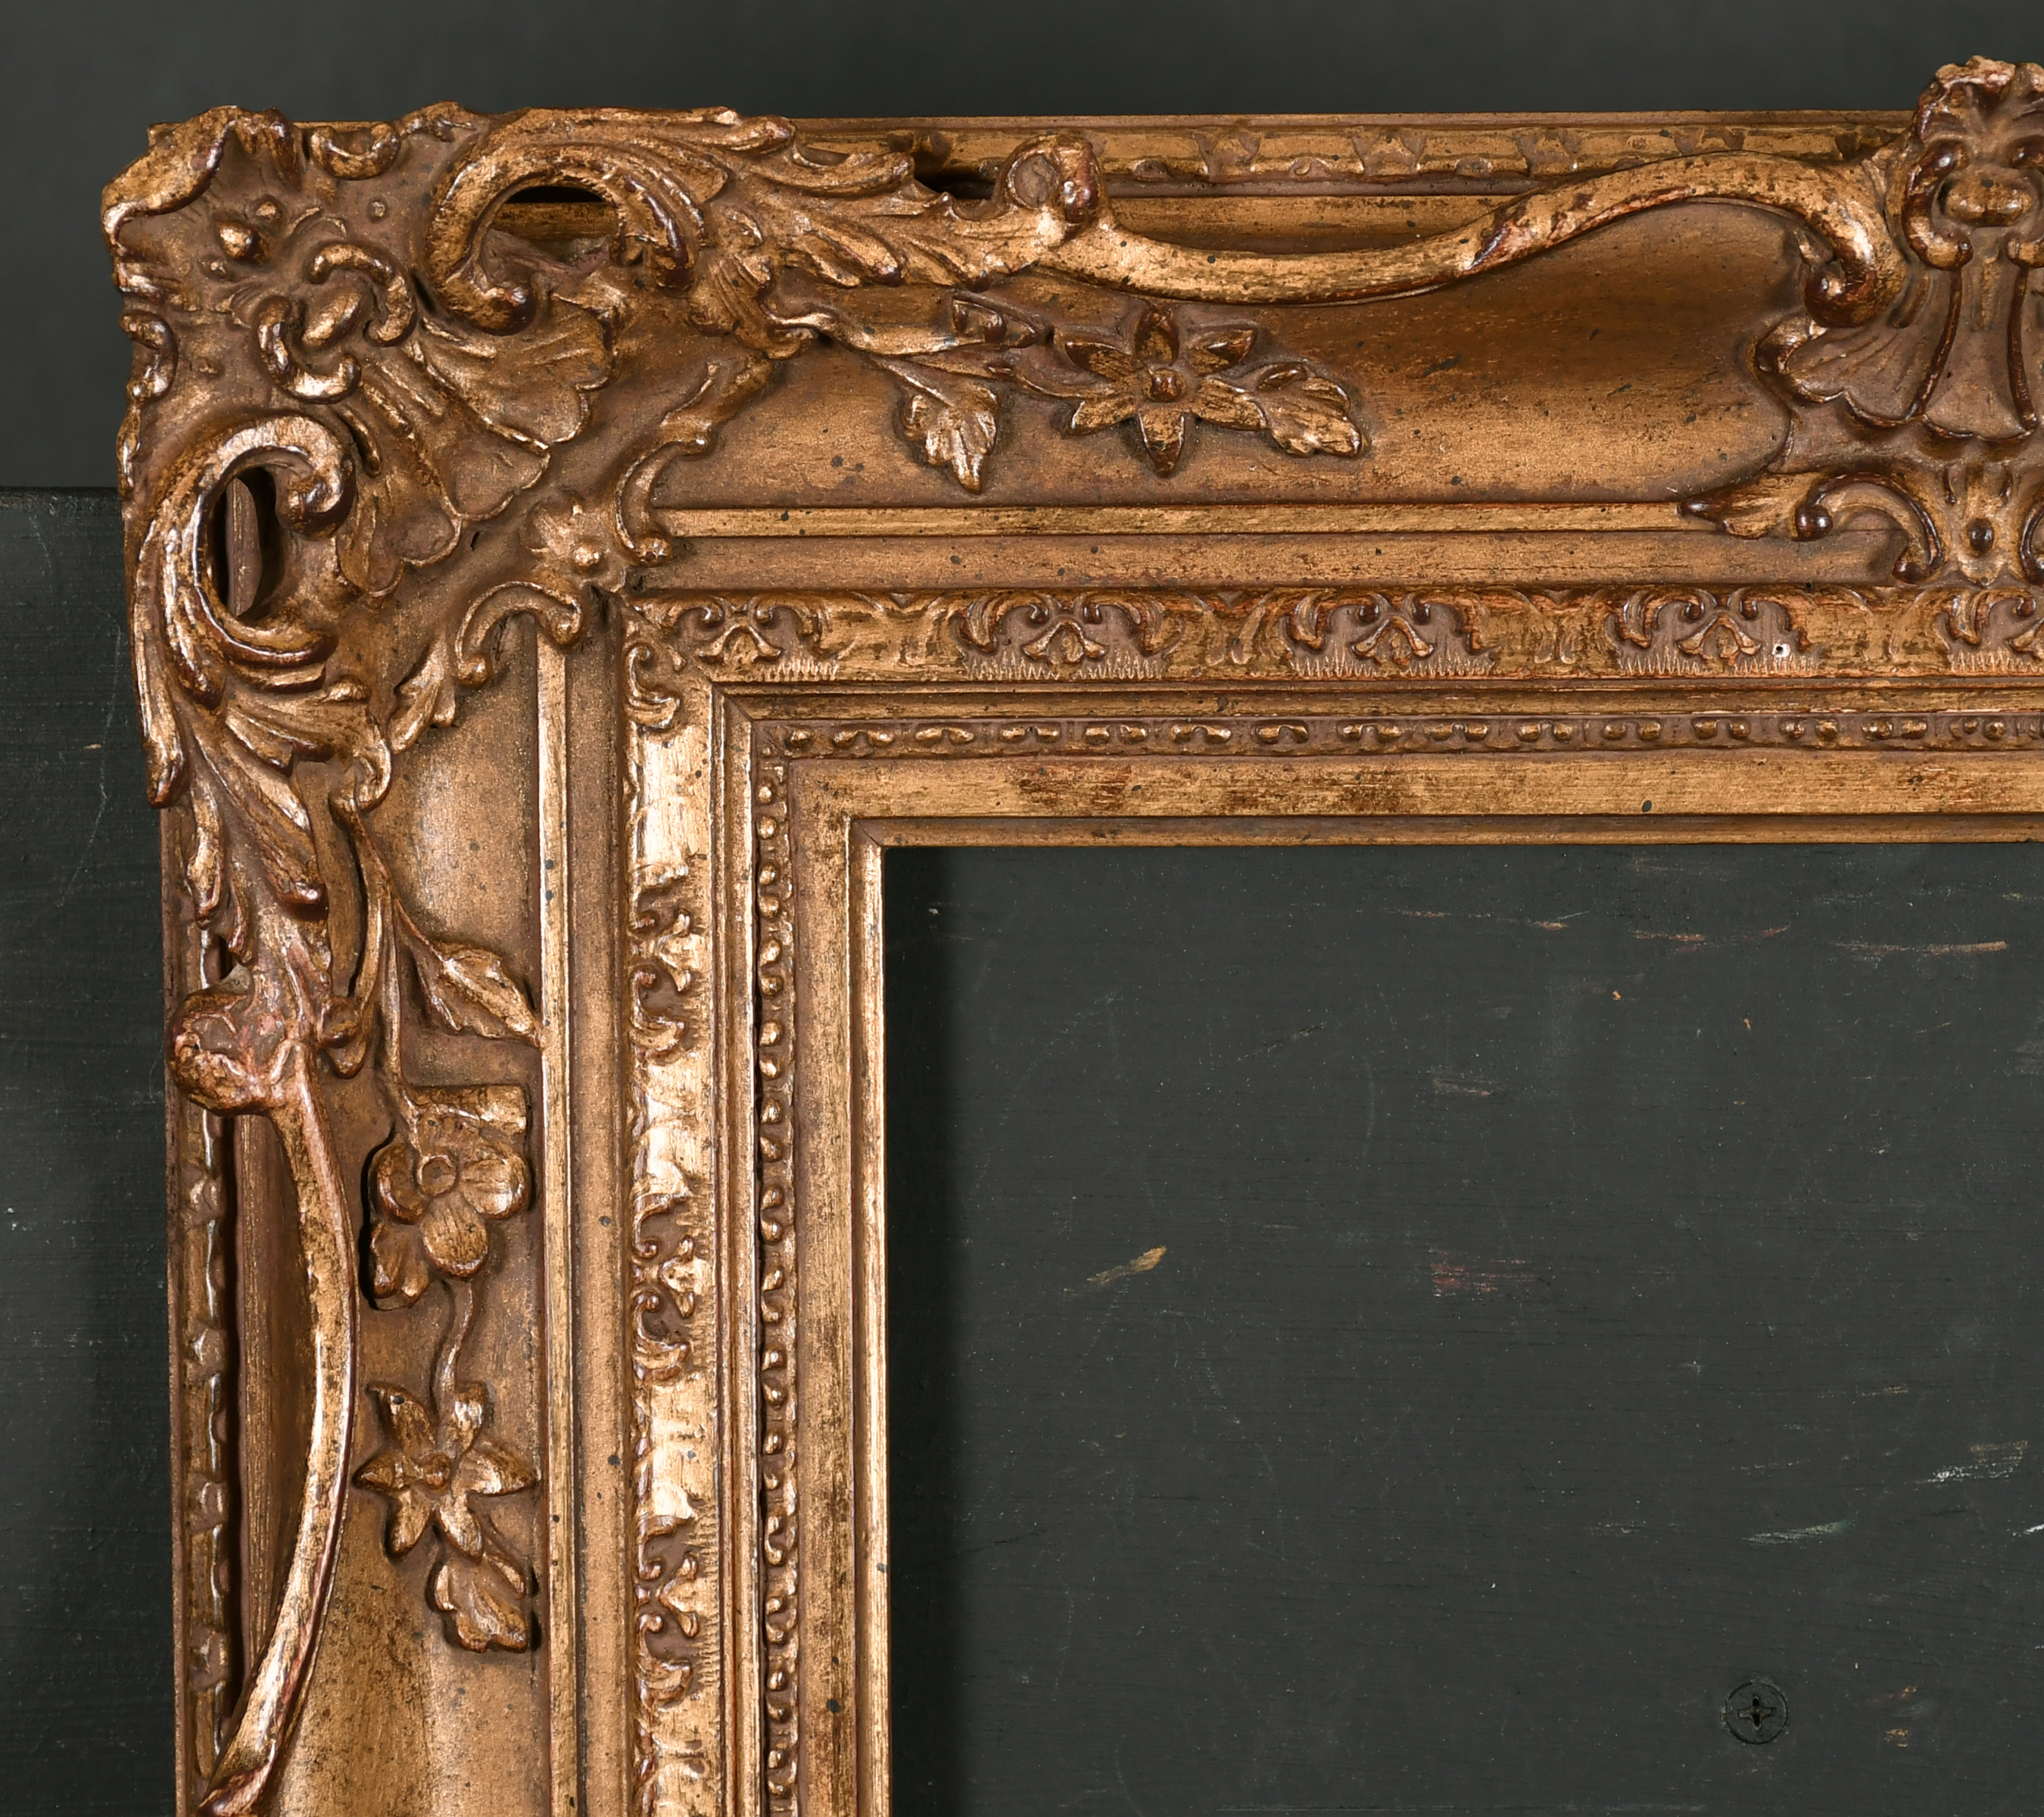 20th Century English School. A Gilt Composition Frame, with swept centres and corners, rebate 14"